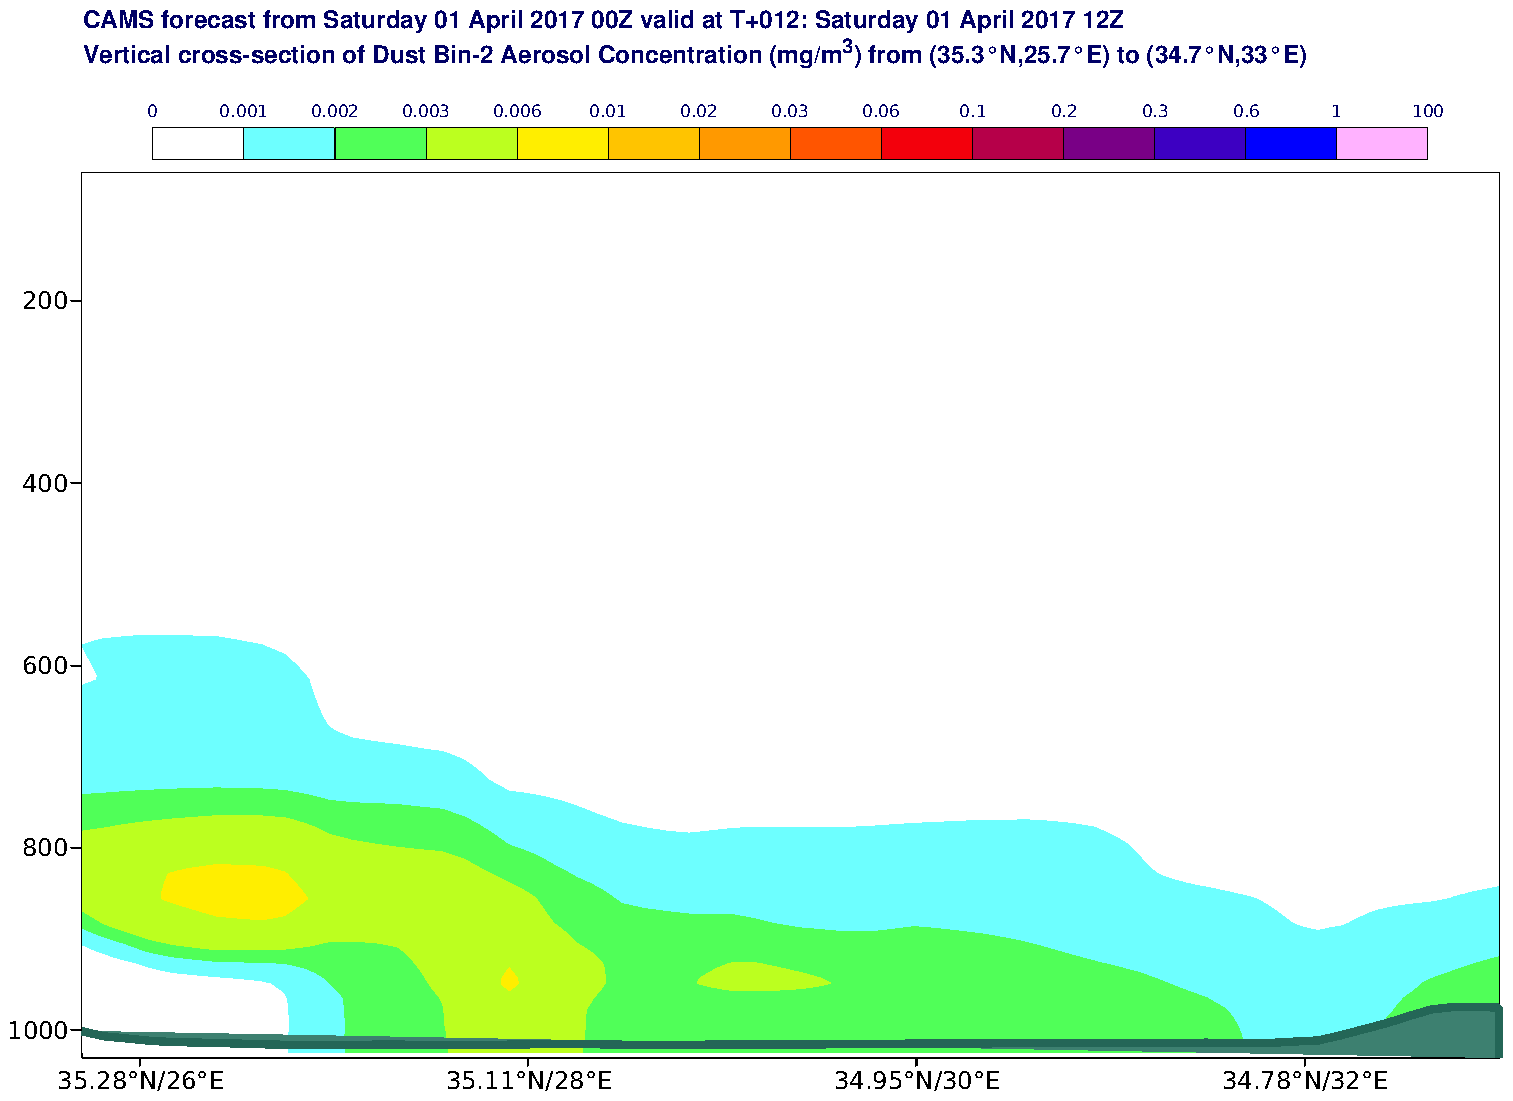 Vertical cross-section of Dust Bin-2 Aerosol Concentration (mg/m3) valid at T12 - 2017-04-01 12:00